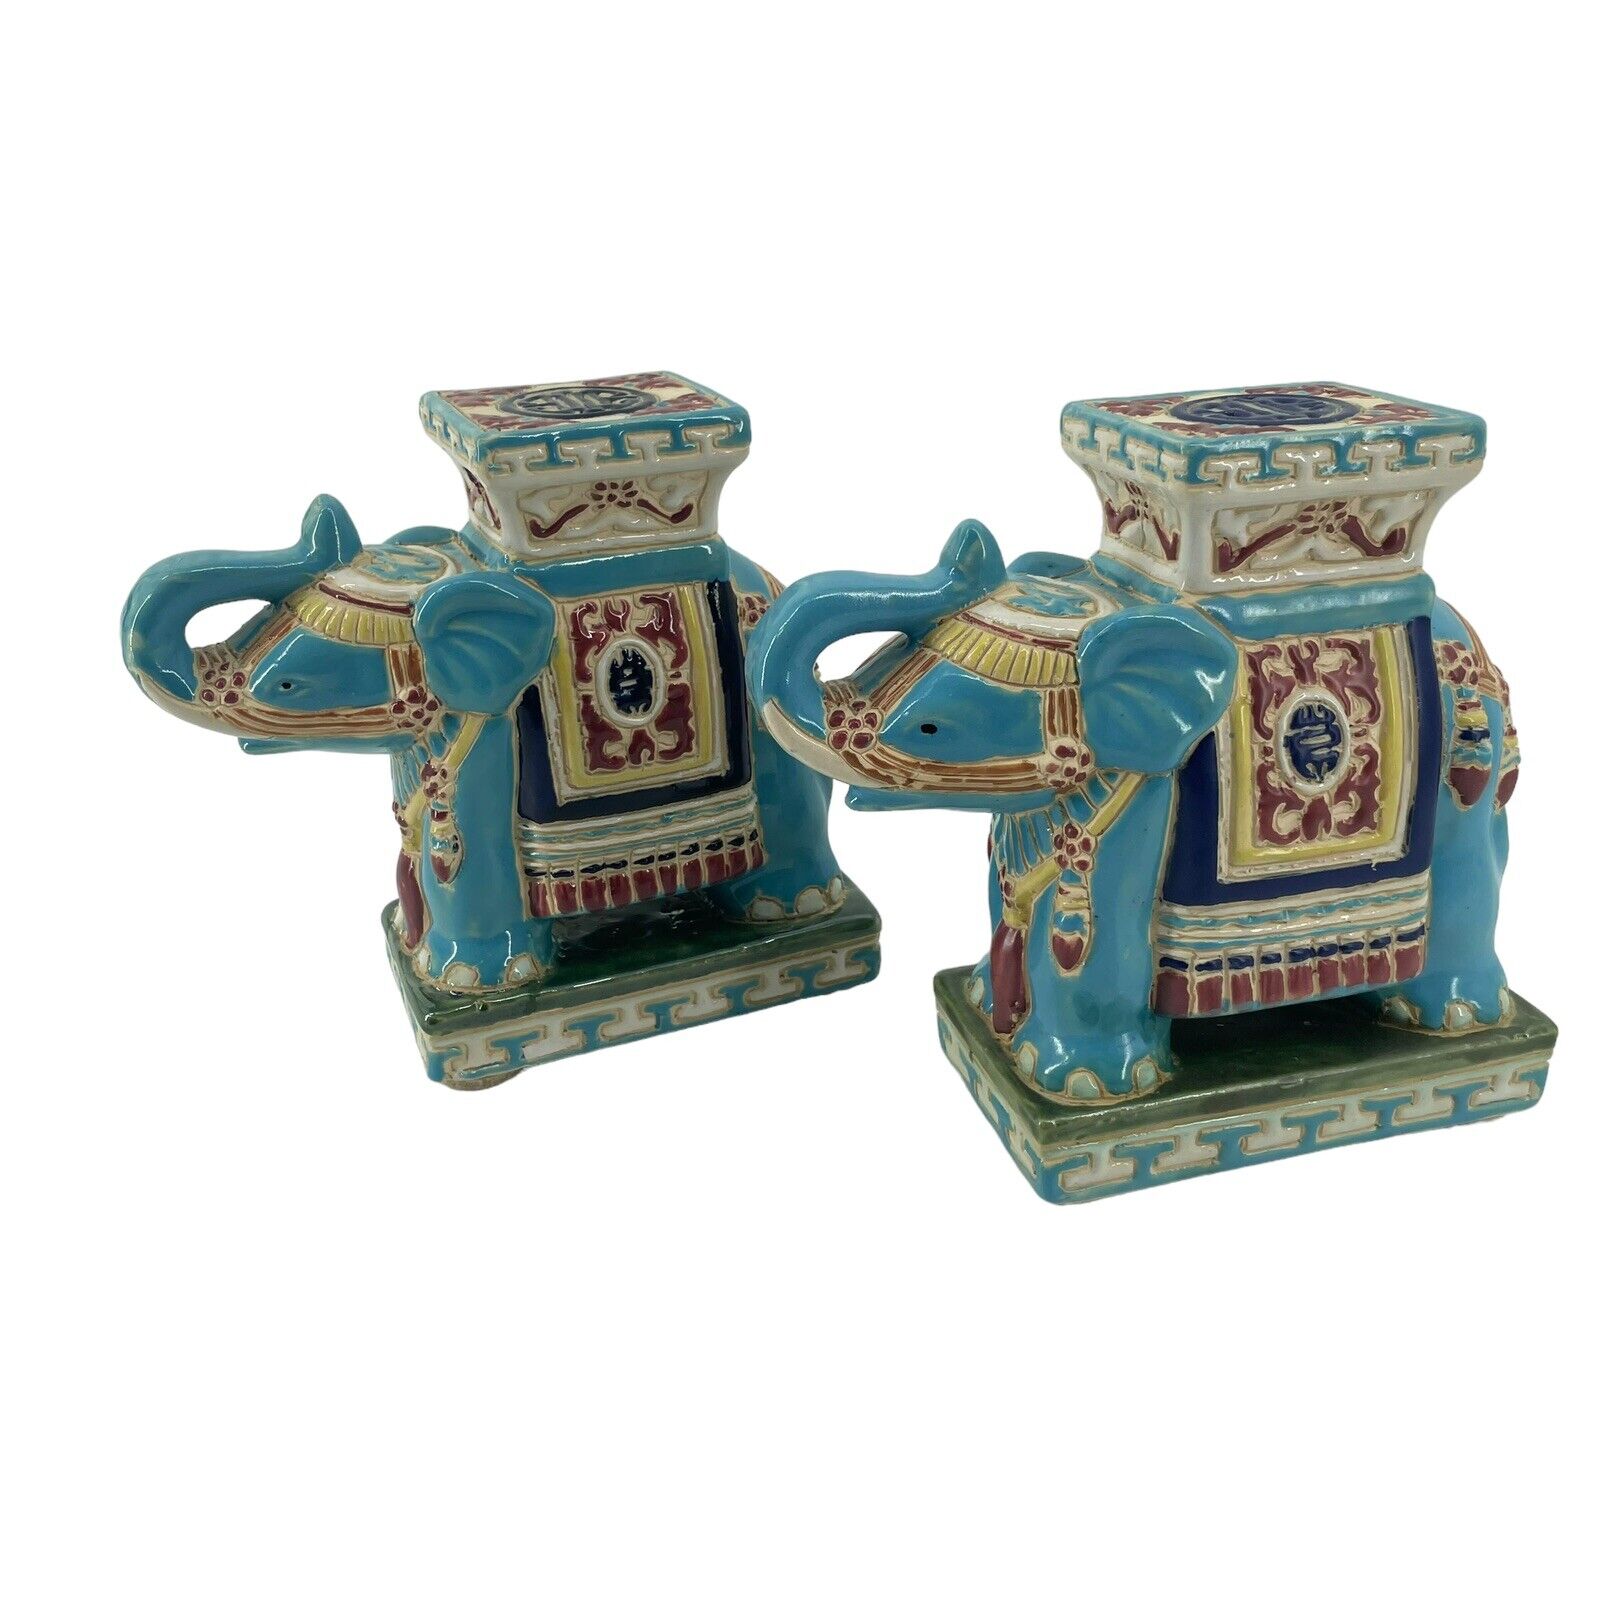 Pair Elephant Ceramic Bookends Plant Holder Made in Vietnam Trunk Up Luck Decor